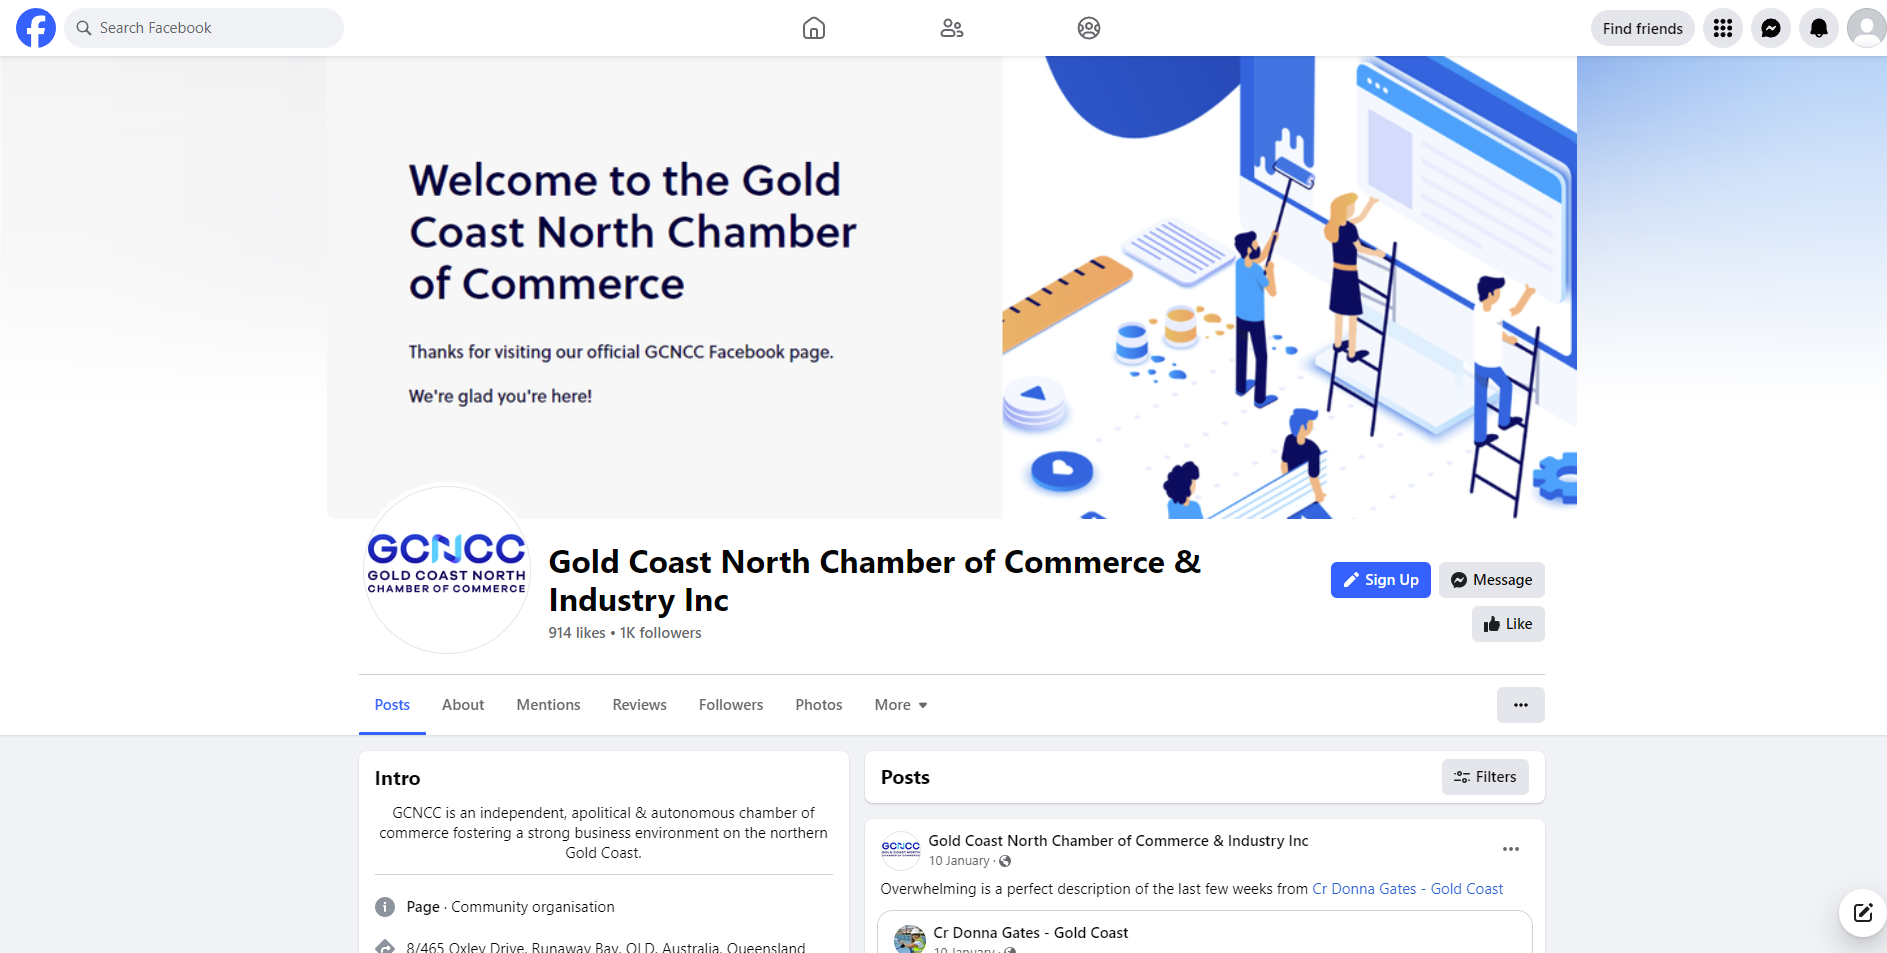 Gold Coast North Chamber of Commerce & Industry Inc